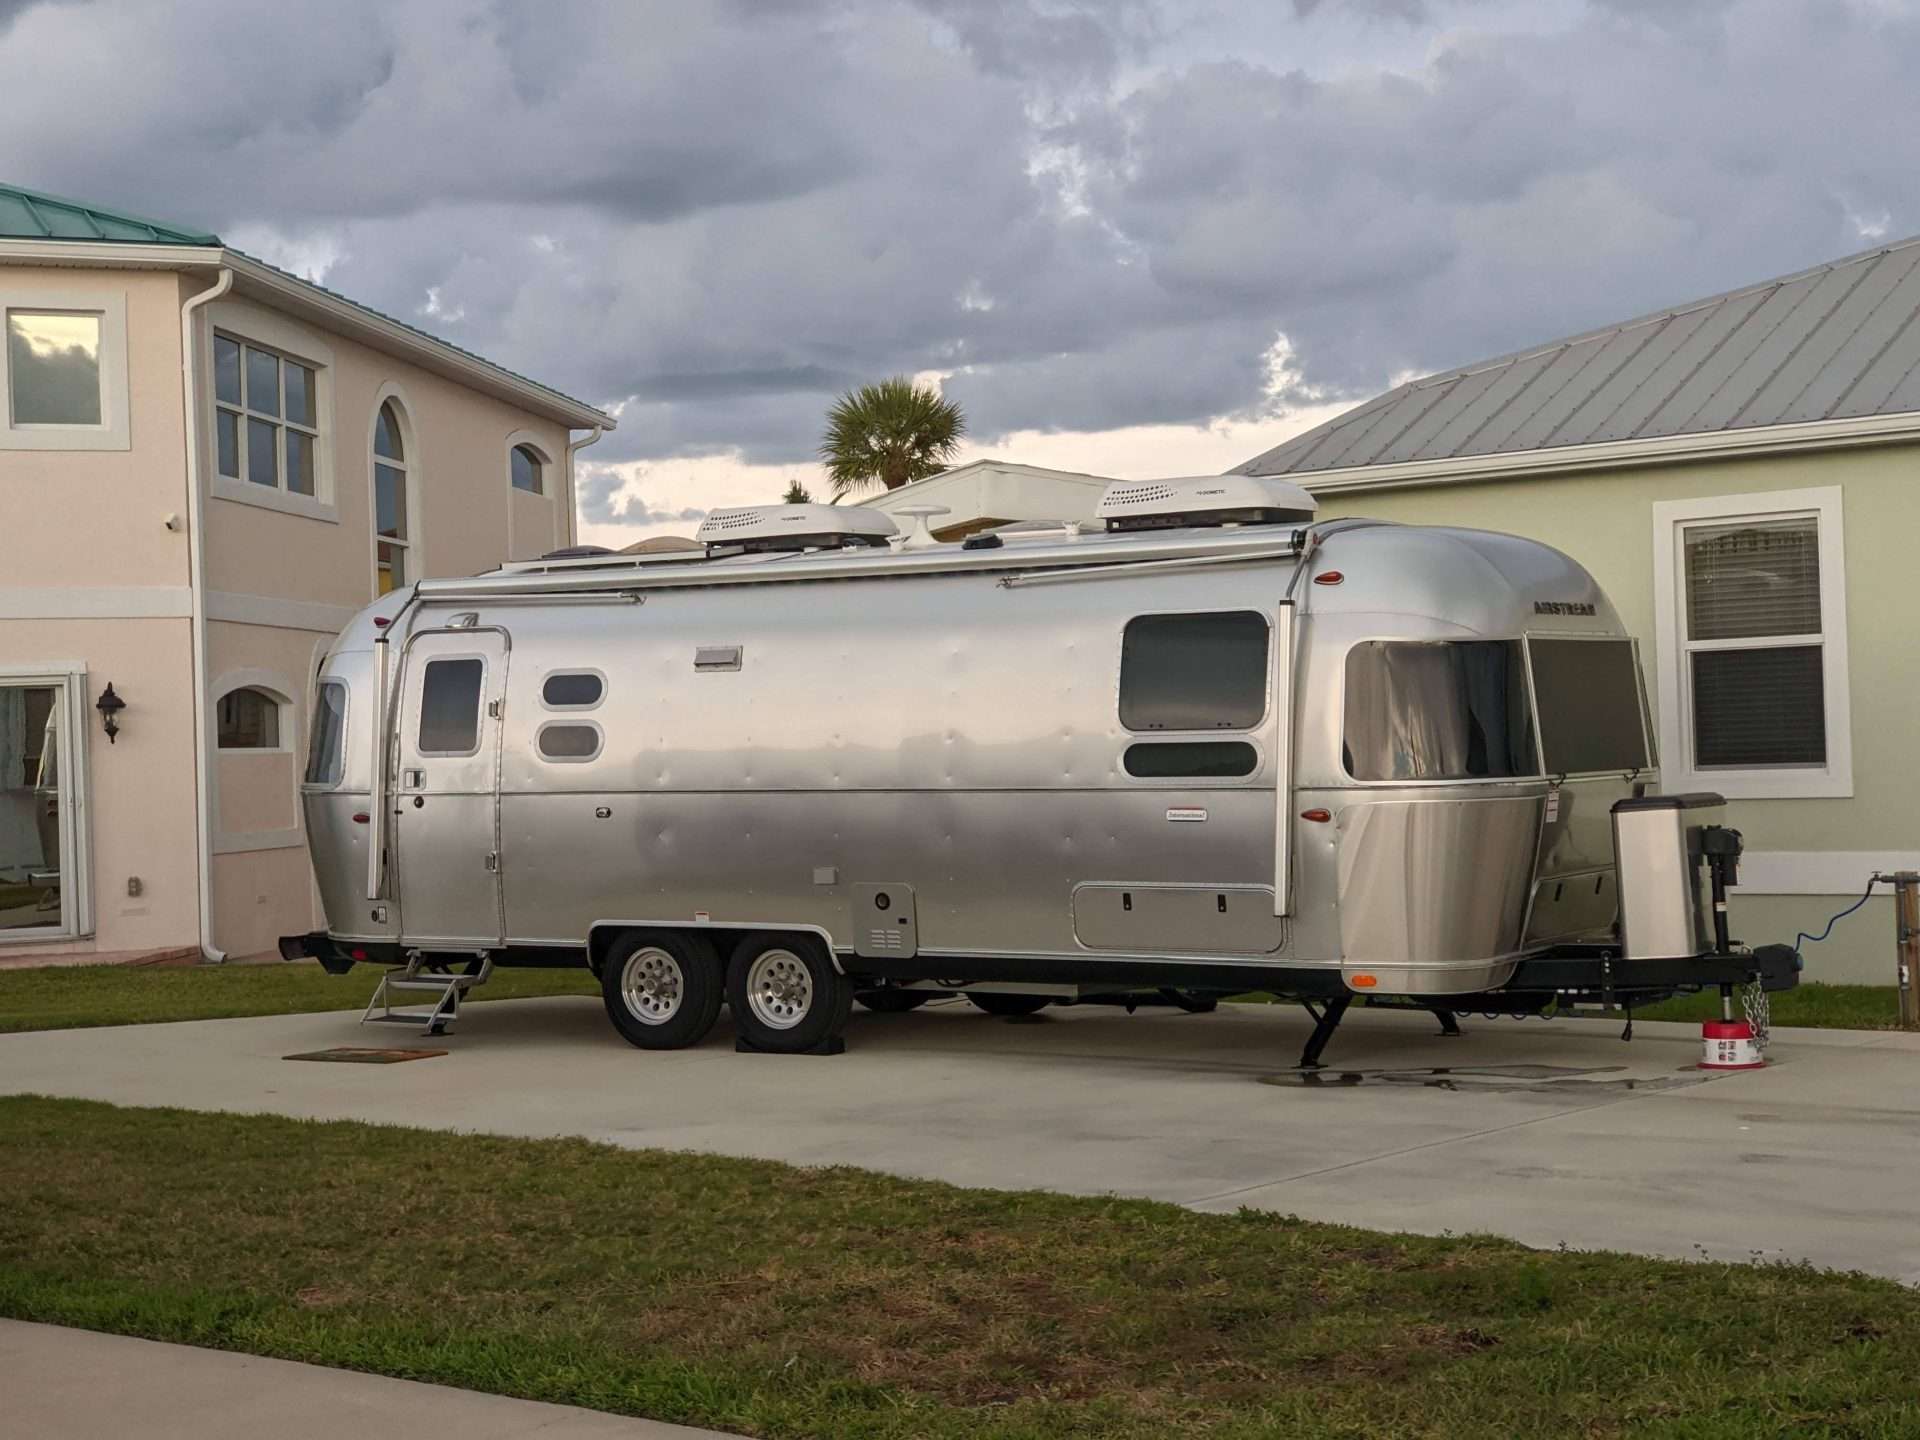 Airstream parked in driveway